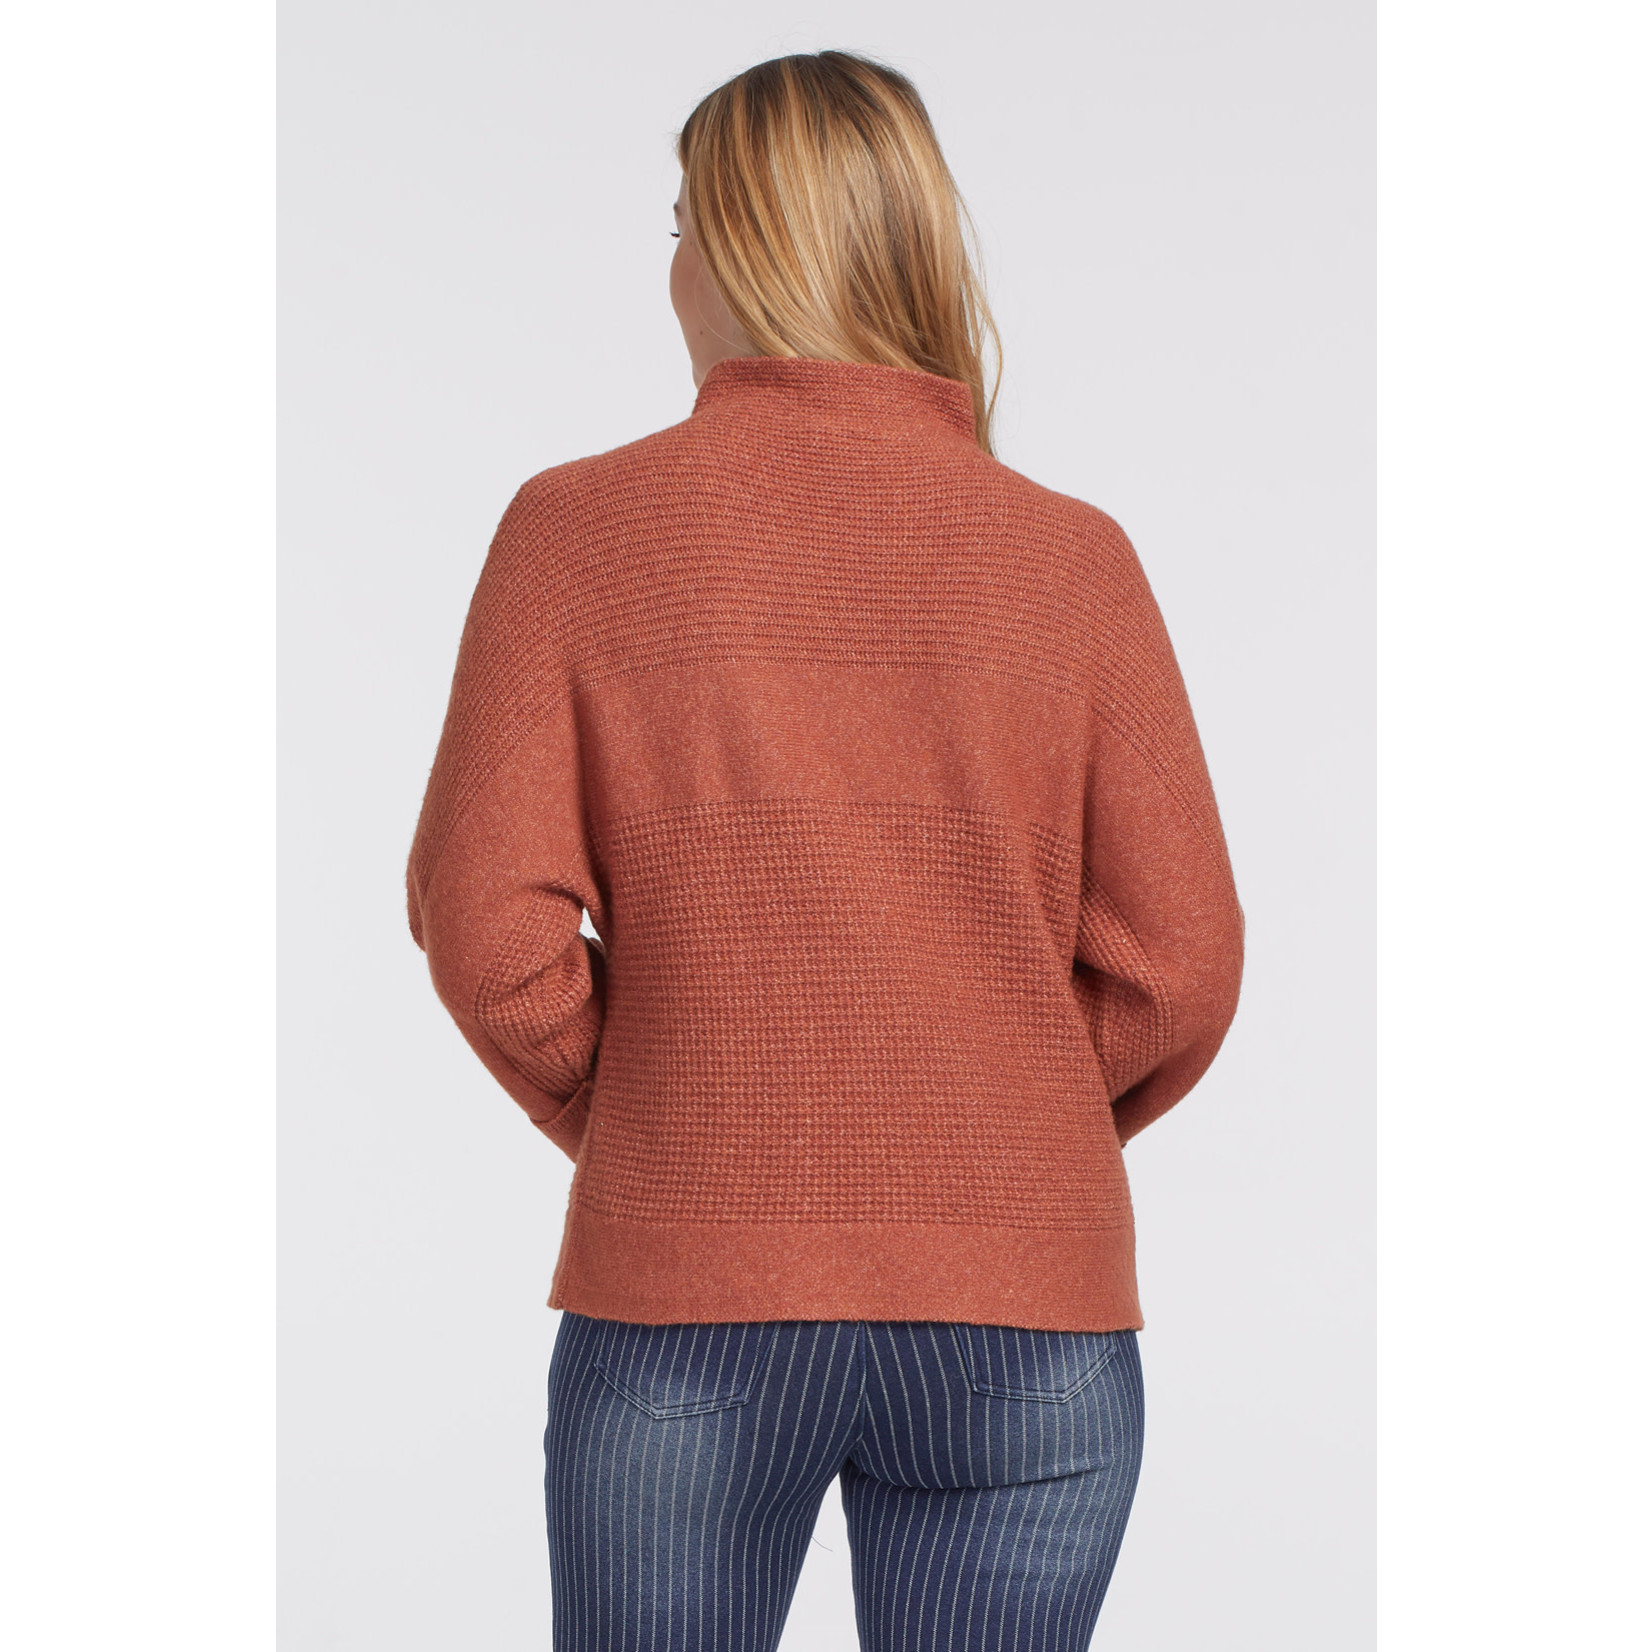 Tribal Funnel Neck Sweater (More Colors)